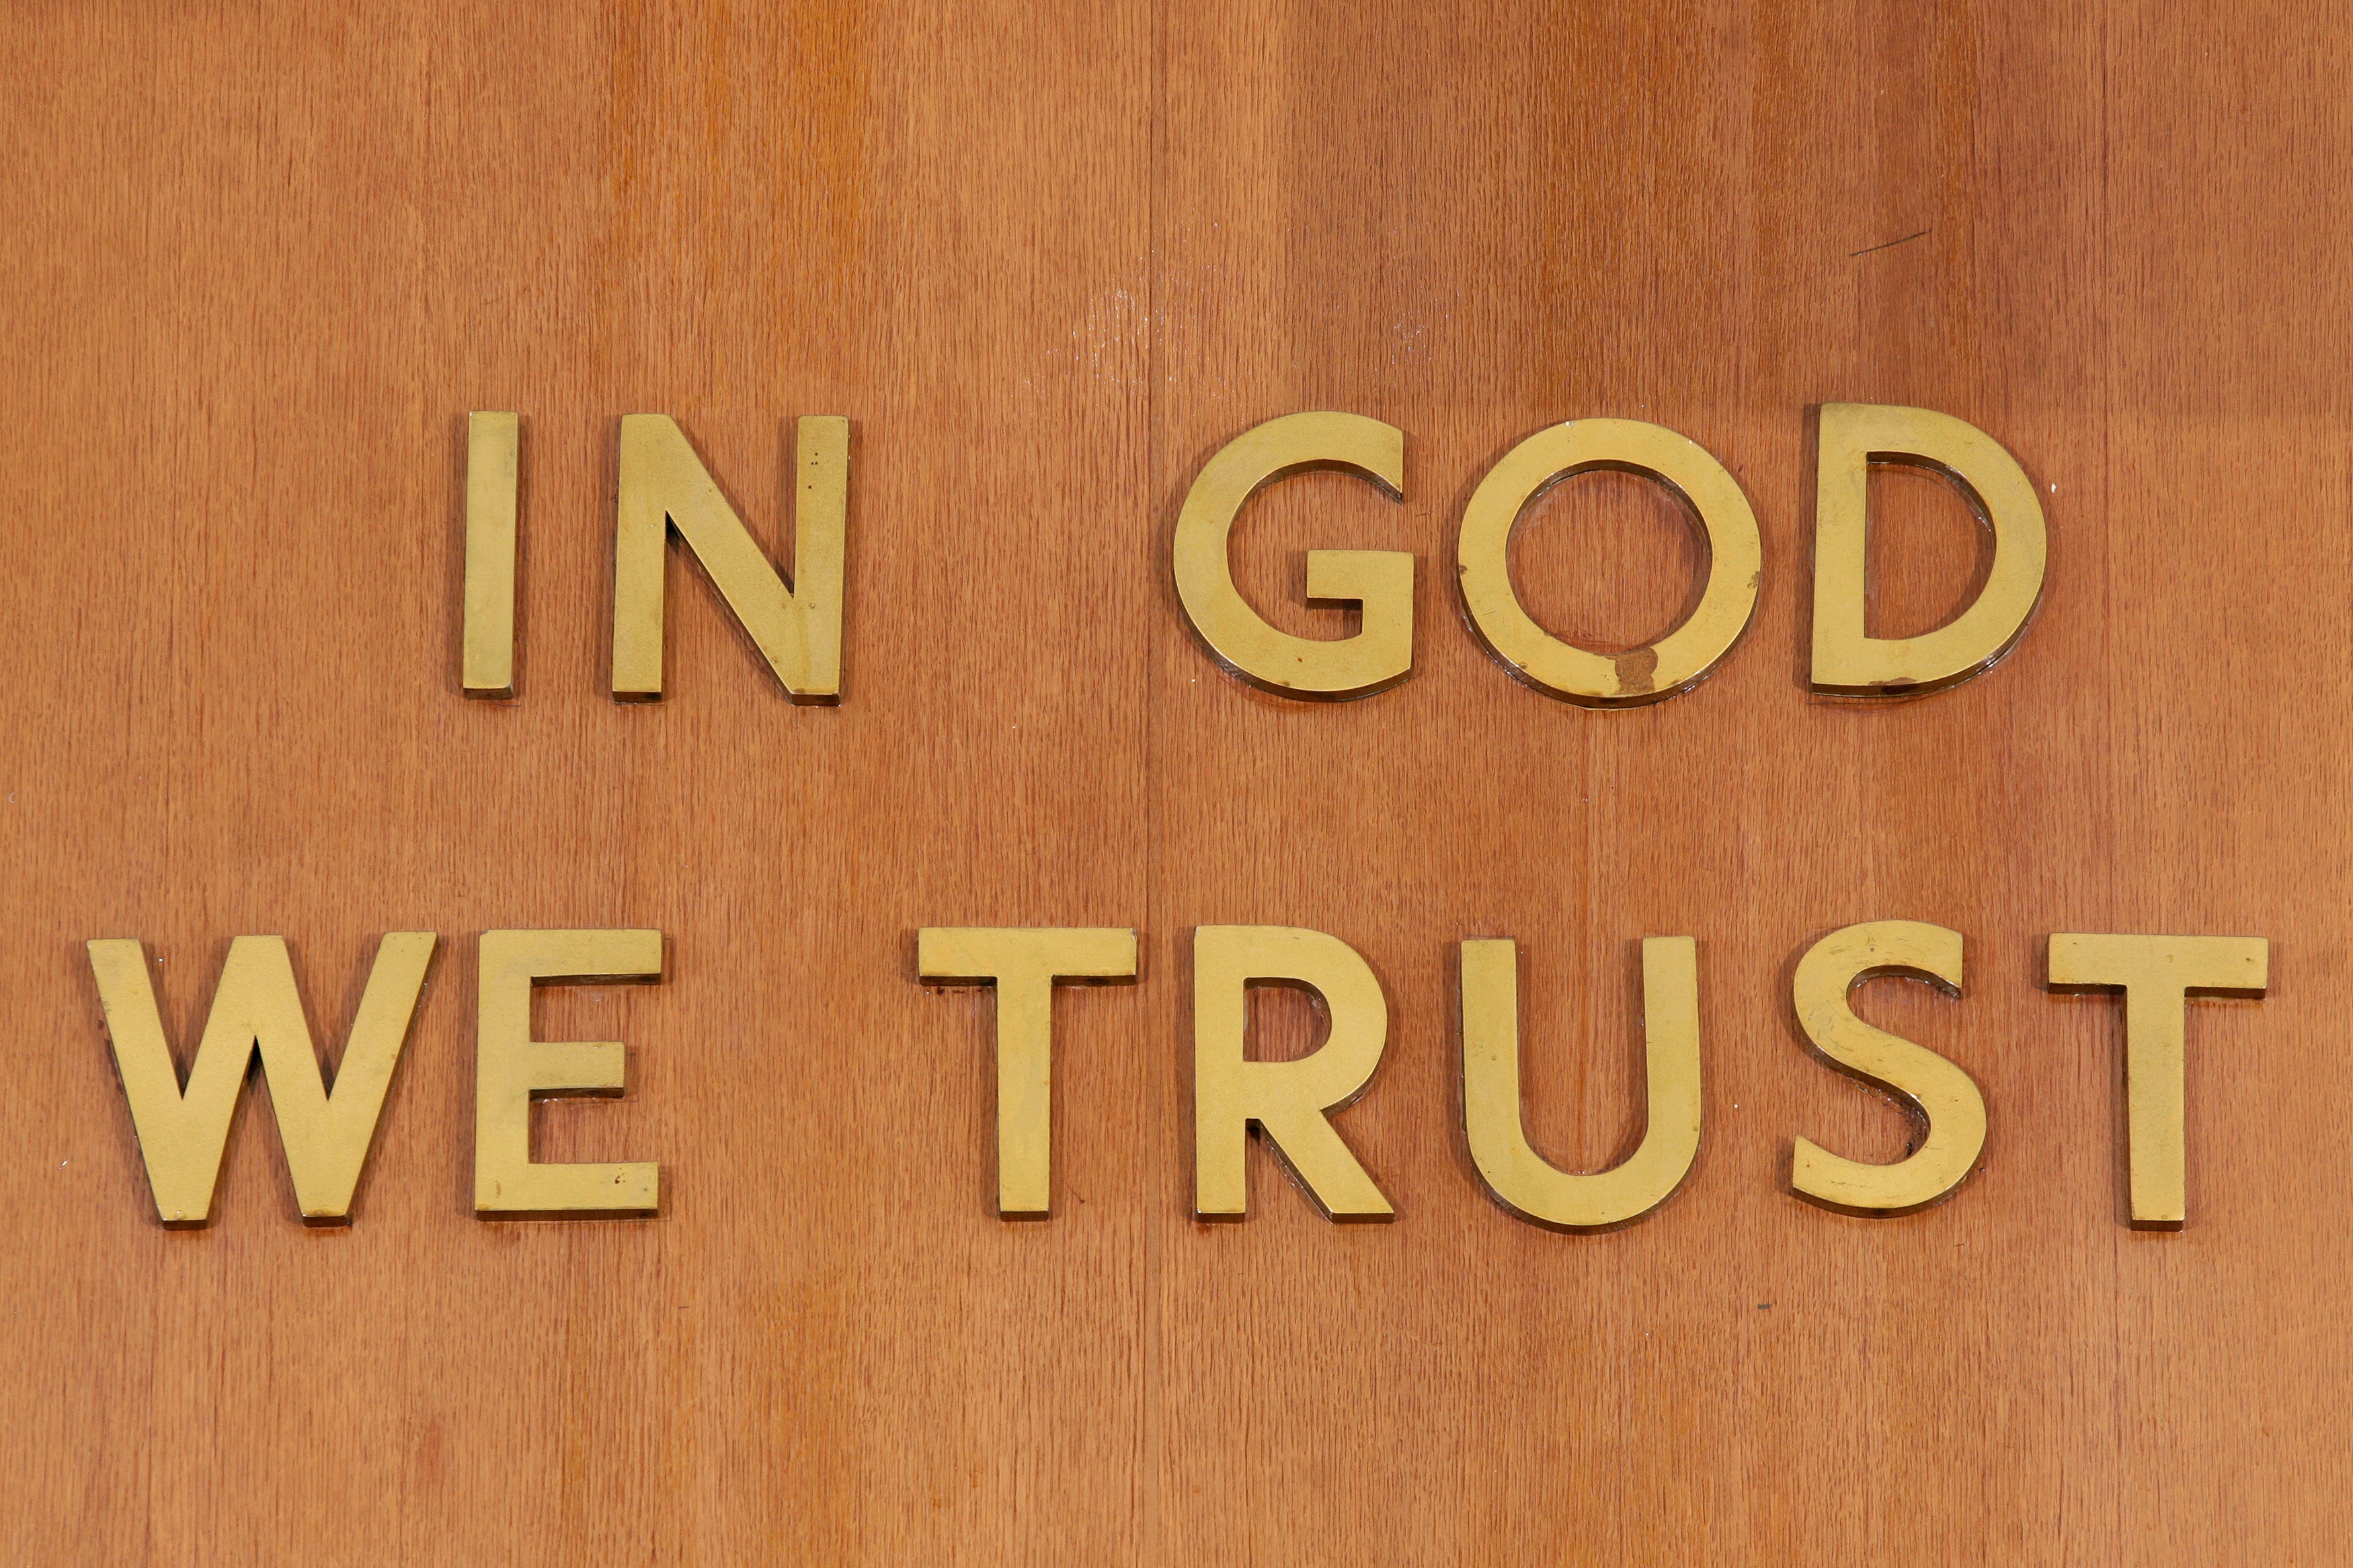 "In God We Trust" is inscribed above the judge's chair at the New York State Supreme Court.